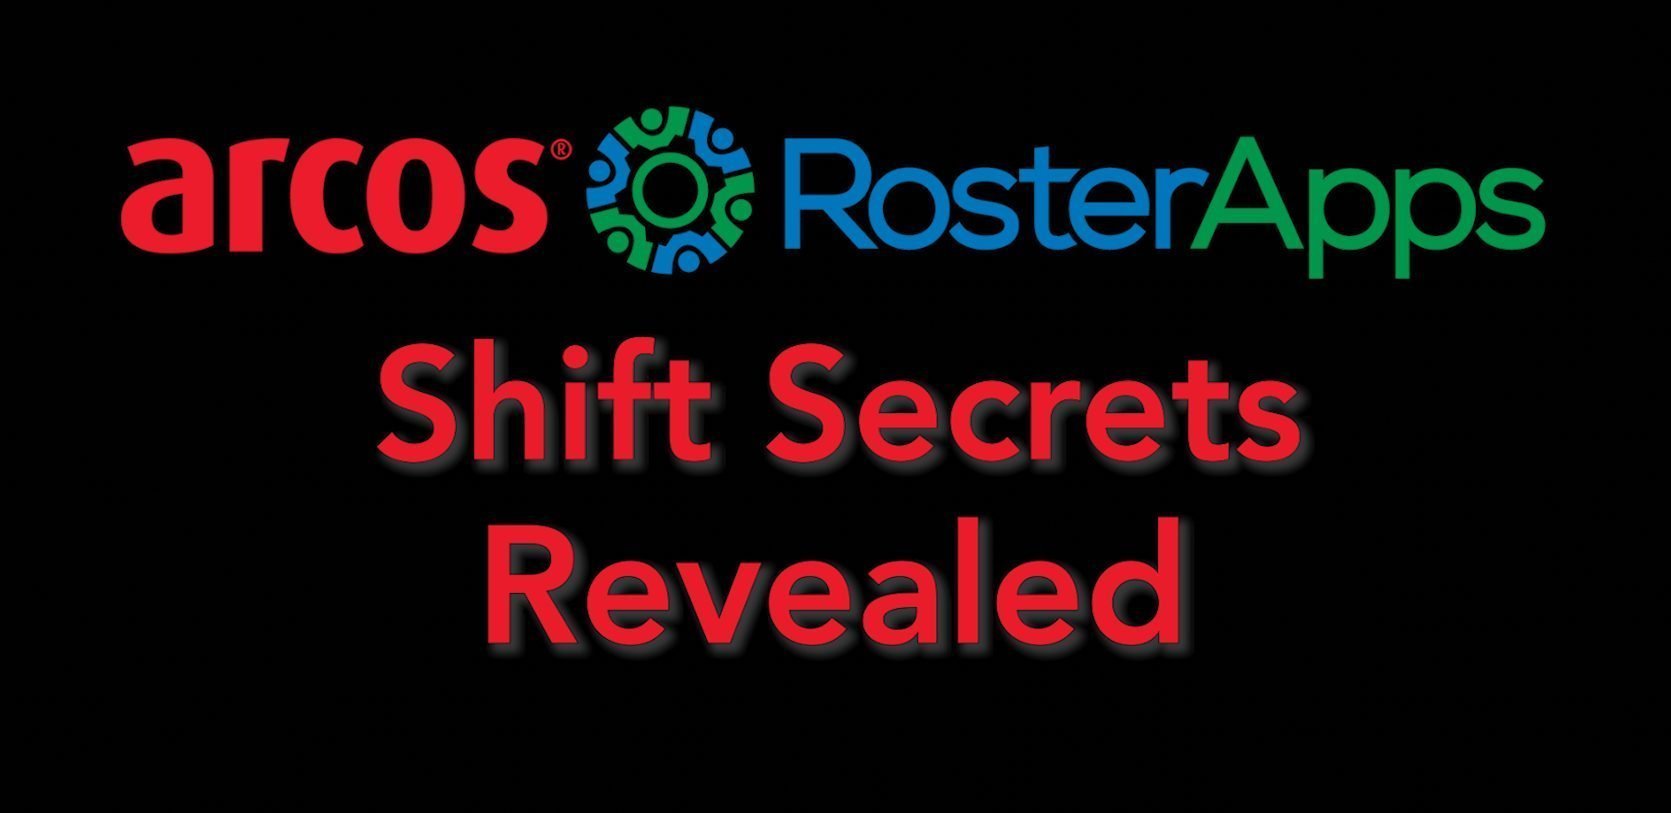 RosterApps Shift Secrets Revealed Series ARCOS LLC